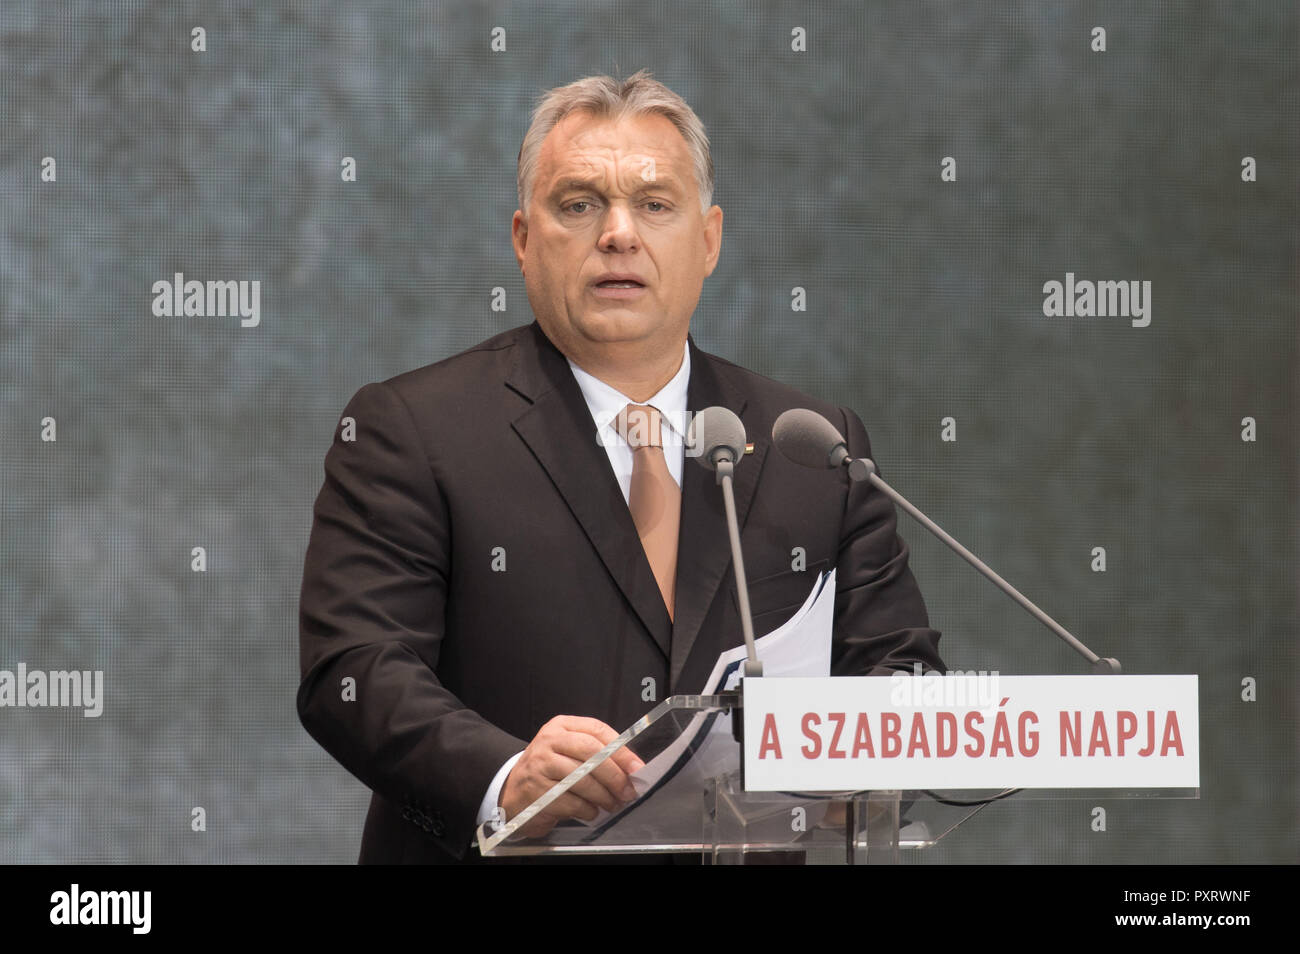 (181024) -- BUDAPEST, Oct. 24, 2018 (Xinhua) -- Hungarian Prime Minister Viktor Orban delivers a speech during the National Day commemorating the 1956 revolution in Budapest, Hungary, on Oct. 23, 2018. Europe's strength has always been provided by the nation states of the continent, Hungarian Prime Minister Viktor Orban said here on Wednesday. (Xinhua/Attila Volgyi) (yy) Stock Photo